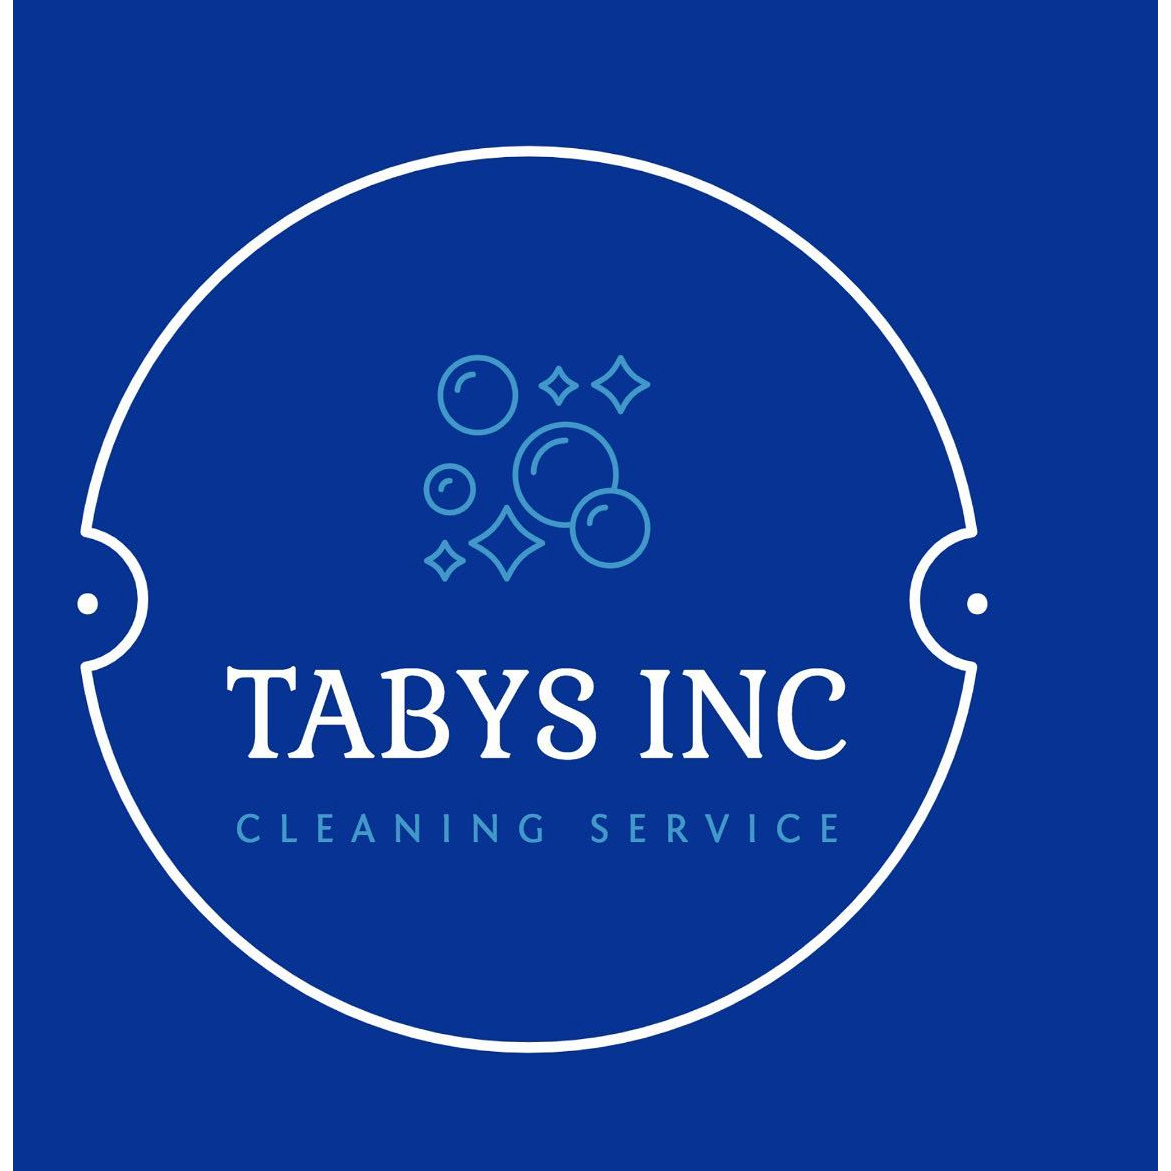 Tabys Home Cleaning Service - New York, NY 10007 - (844)722-2631 | ShowMeLocal.com